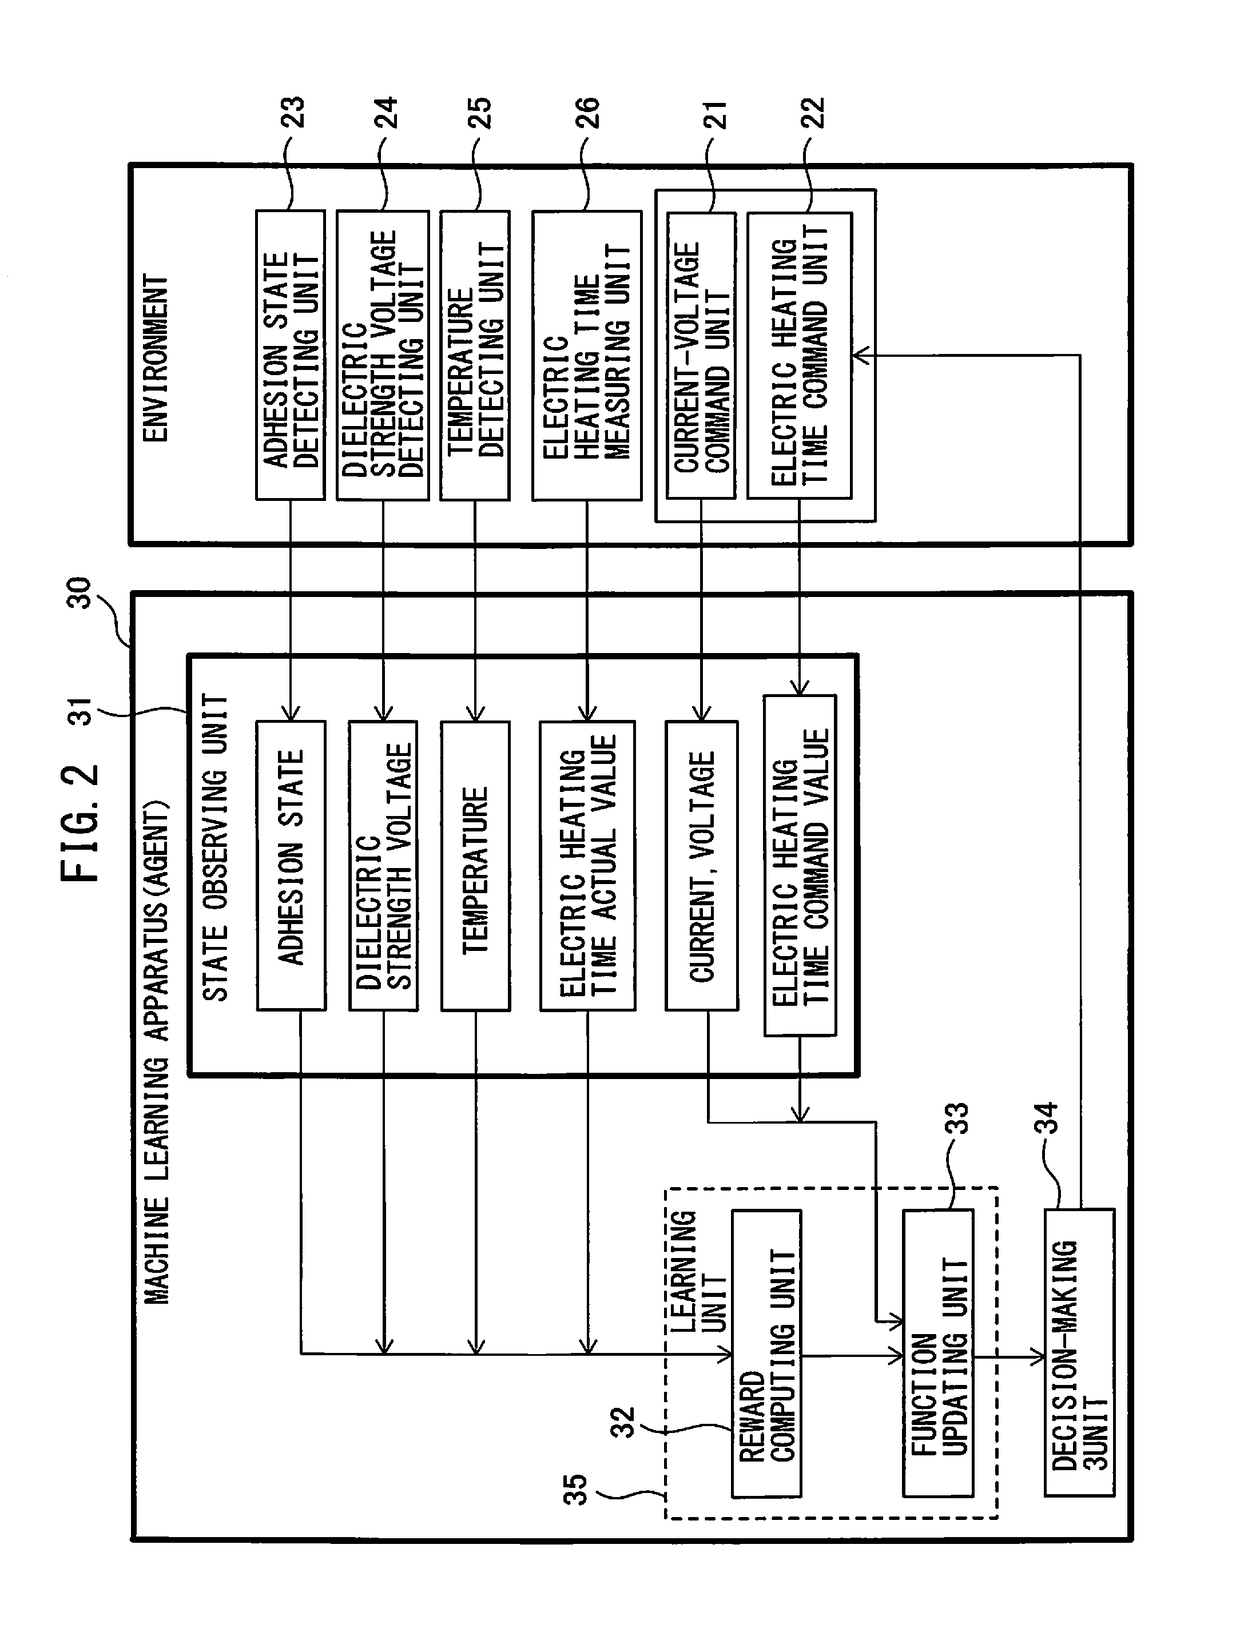 Machine learning apparatus and coil electric heating apparatus